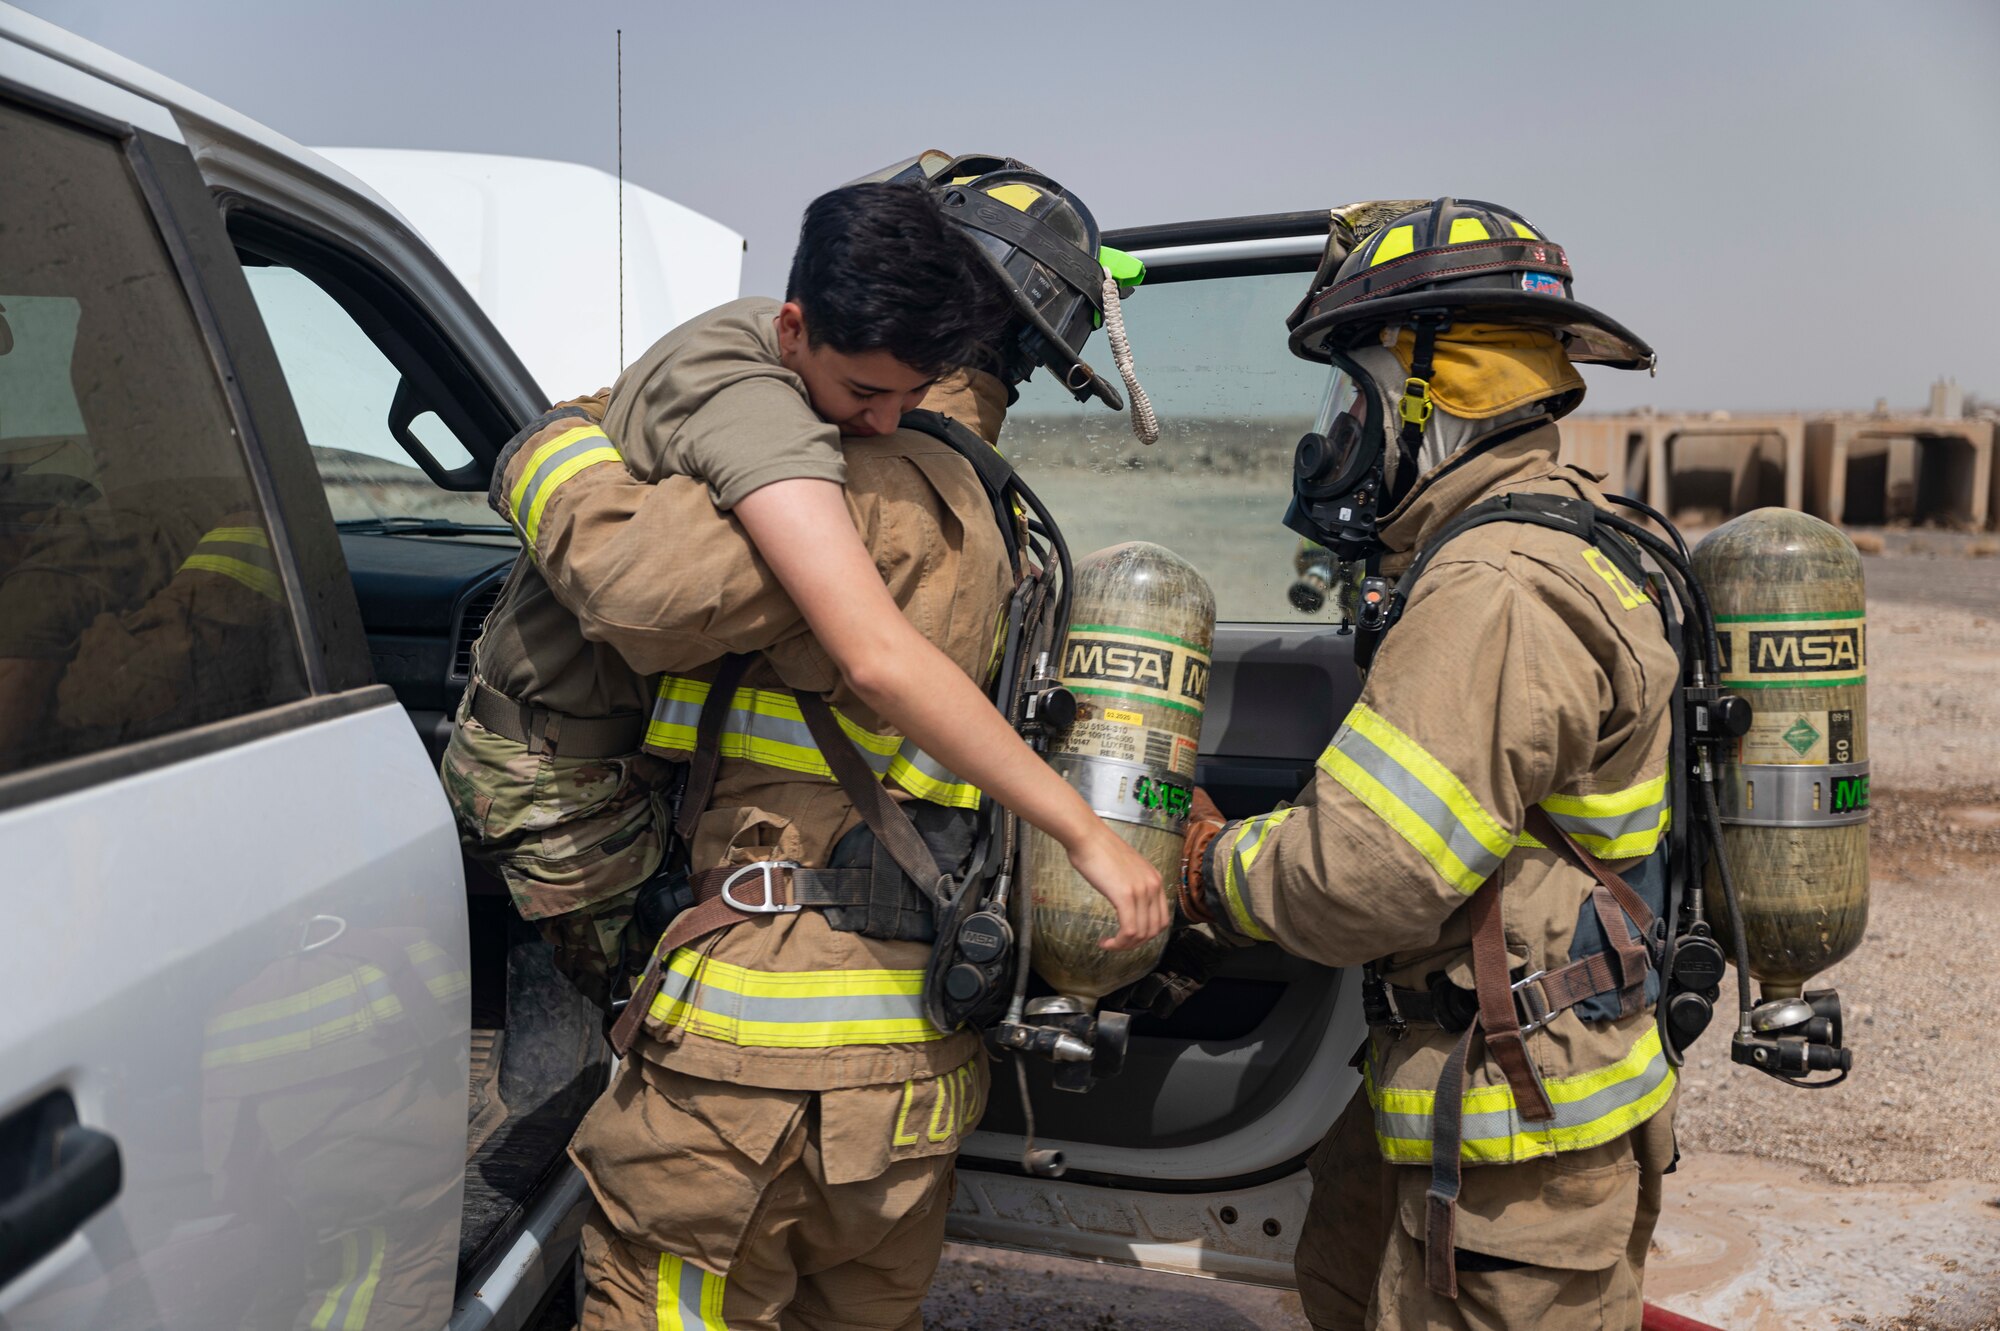 U.S Air Force firefighters and Army medics hone readiness skills at Chabelley Airfield